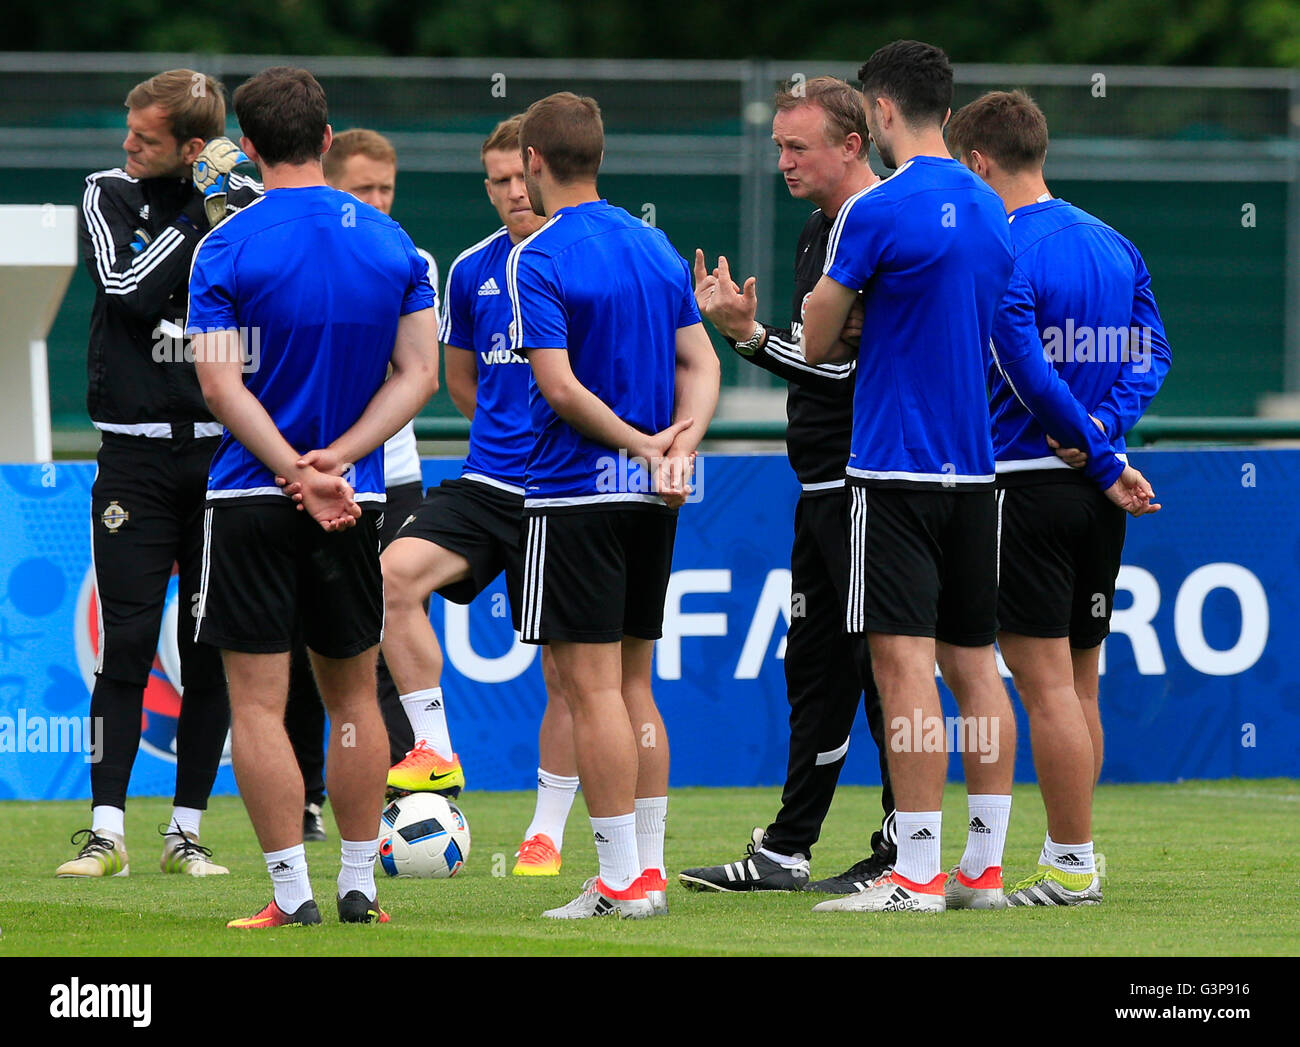 Northern Ireland manager Michael O'Neill (centre right) speaks to players during a training session at Saint-George-de-Reneins. PRESS ASSOCIATION Photo. Picture date: Tuesday June 14, 2016. See PA story SOCCER N Ireland. Photo credit should read: Jonathan Brady/PA Wire. Stock Photo